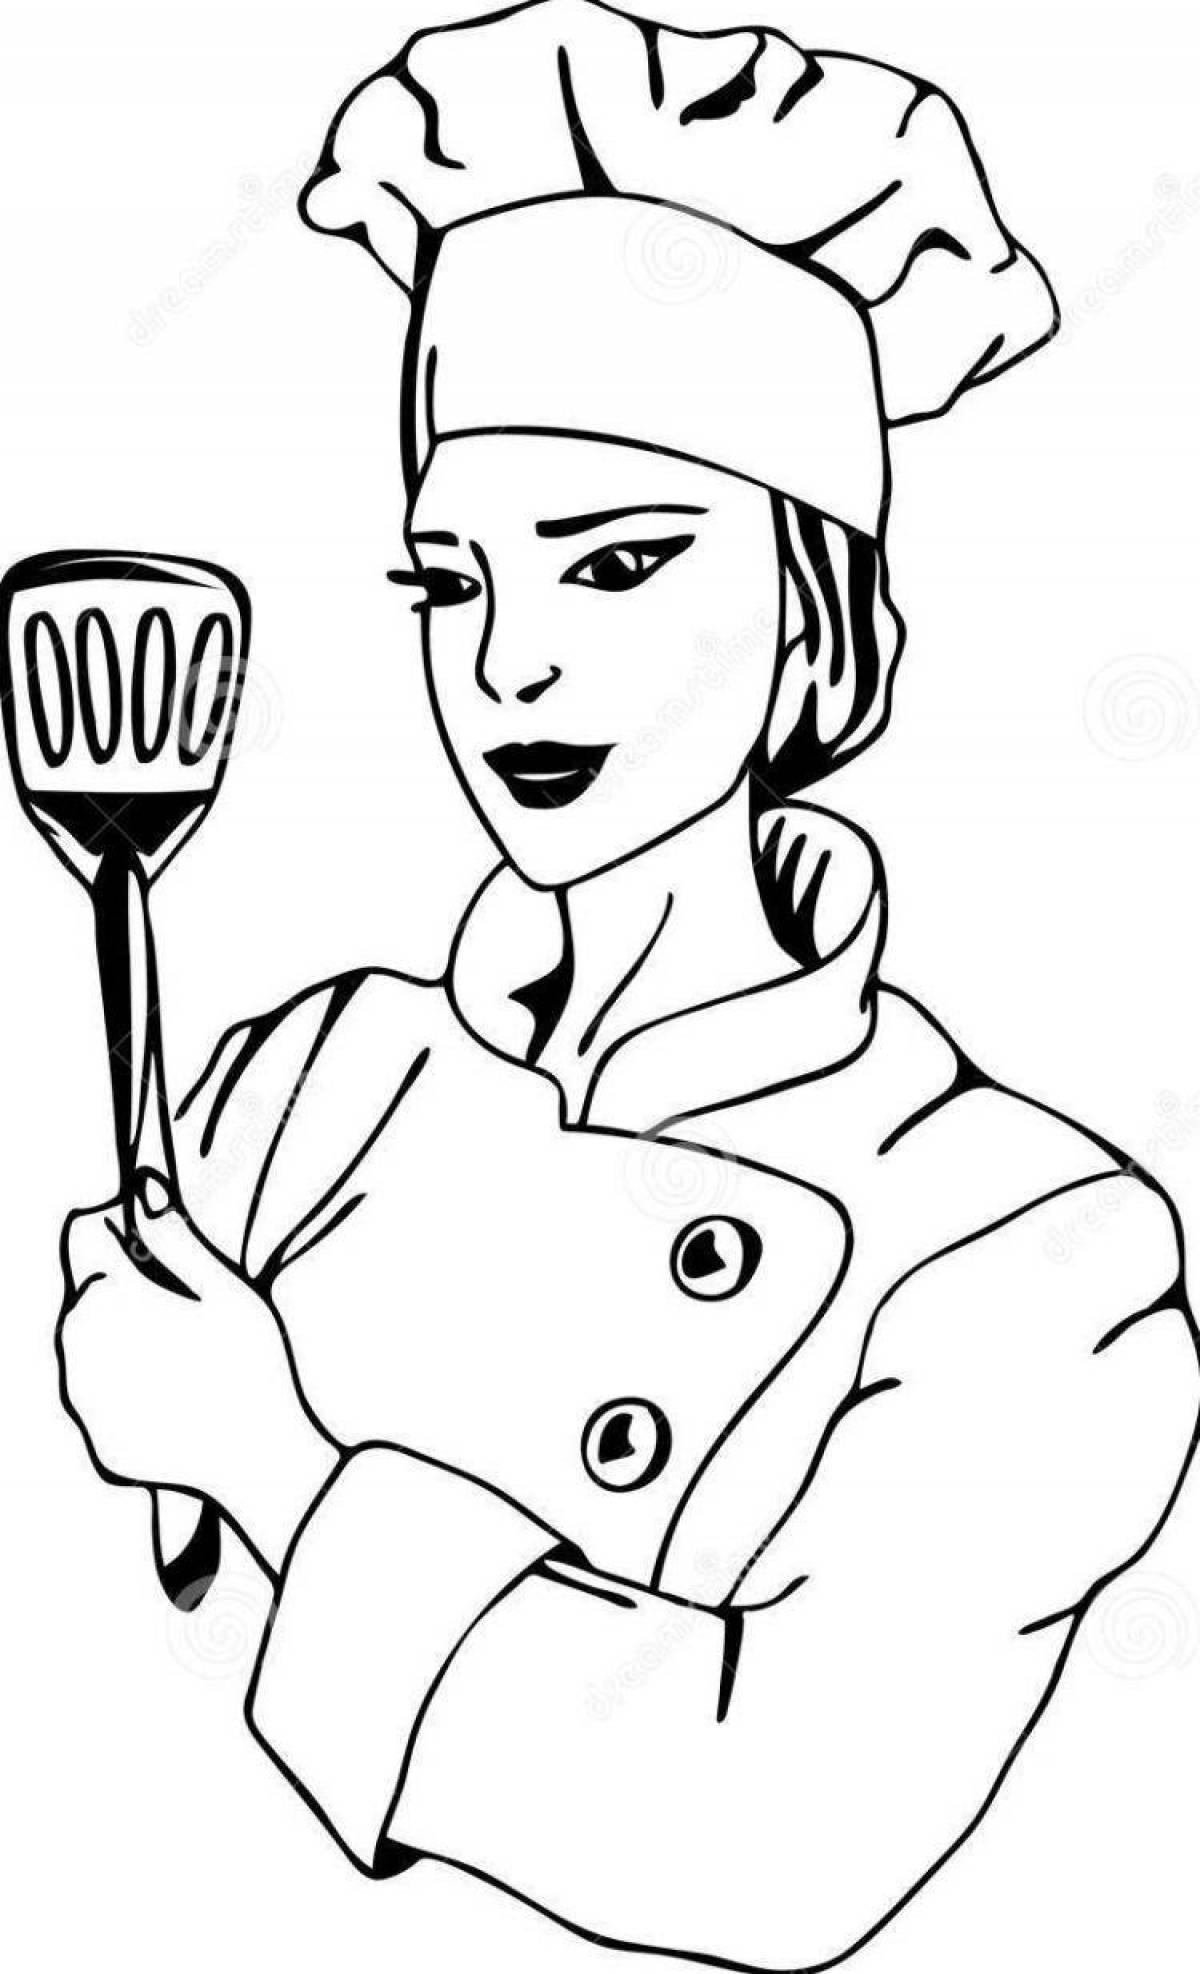 Exciting chef coloring book